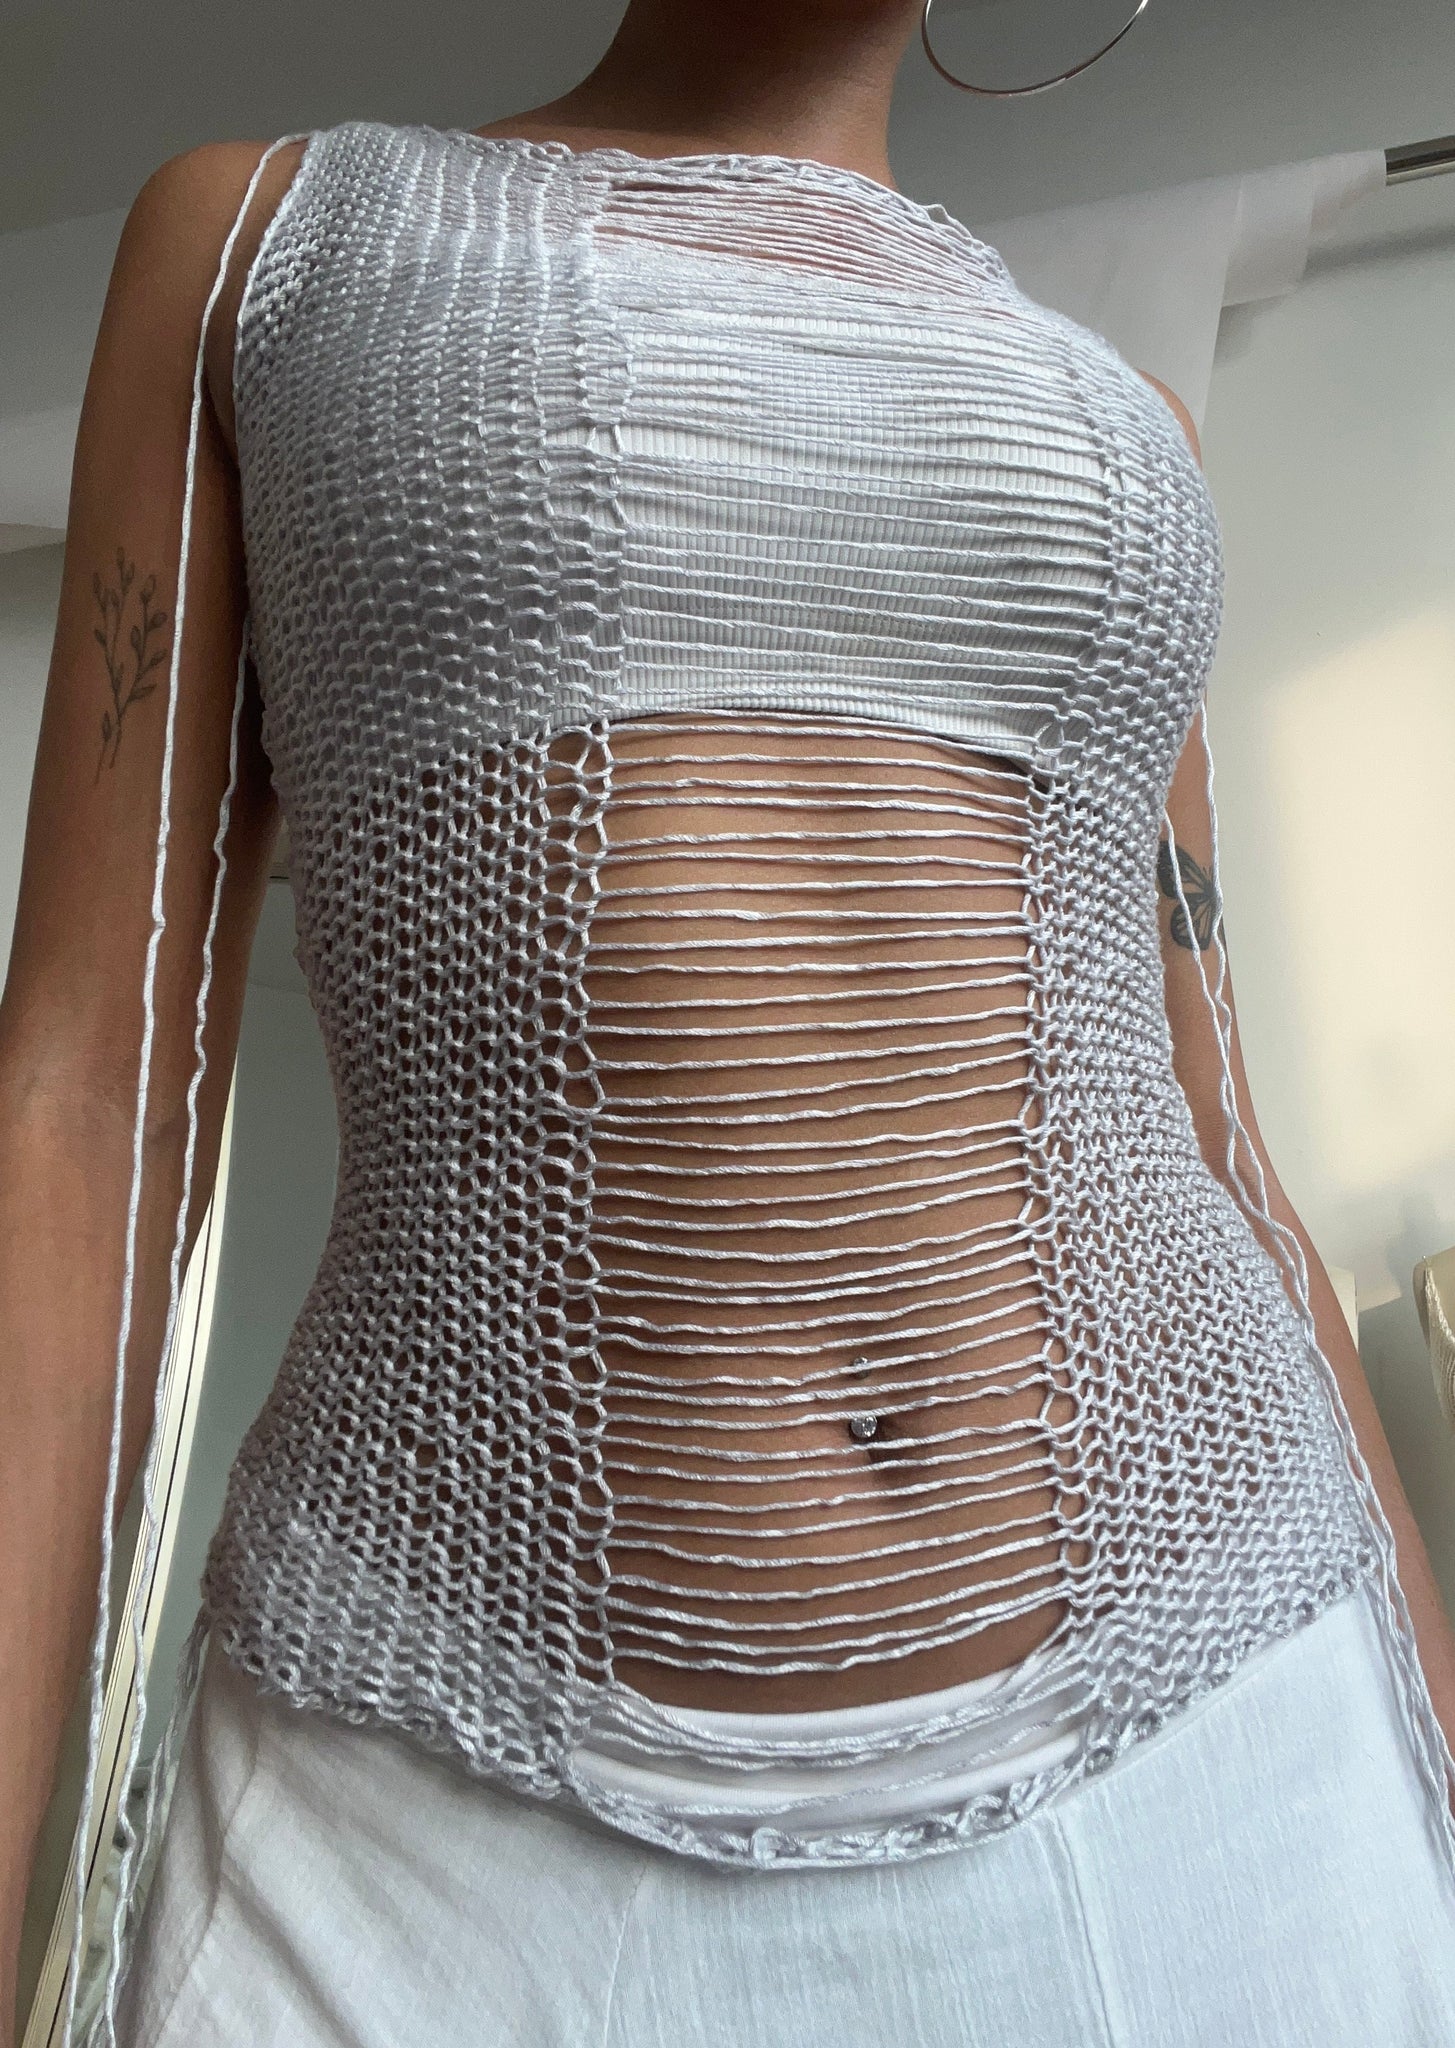 Mithril Top